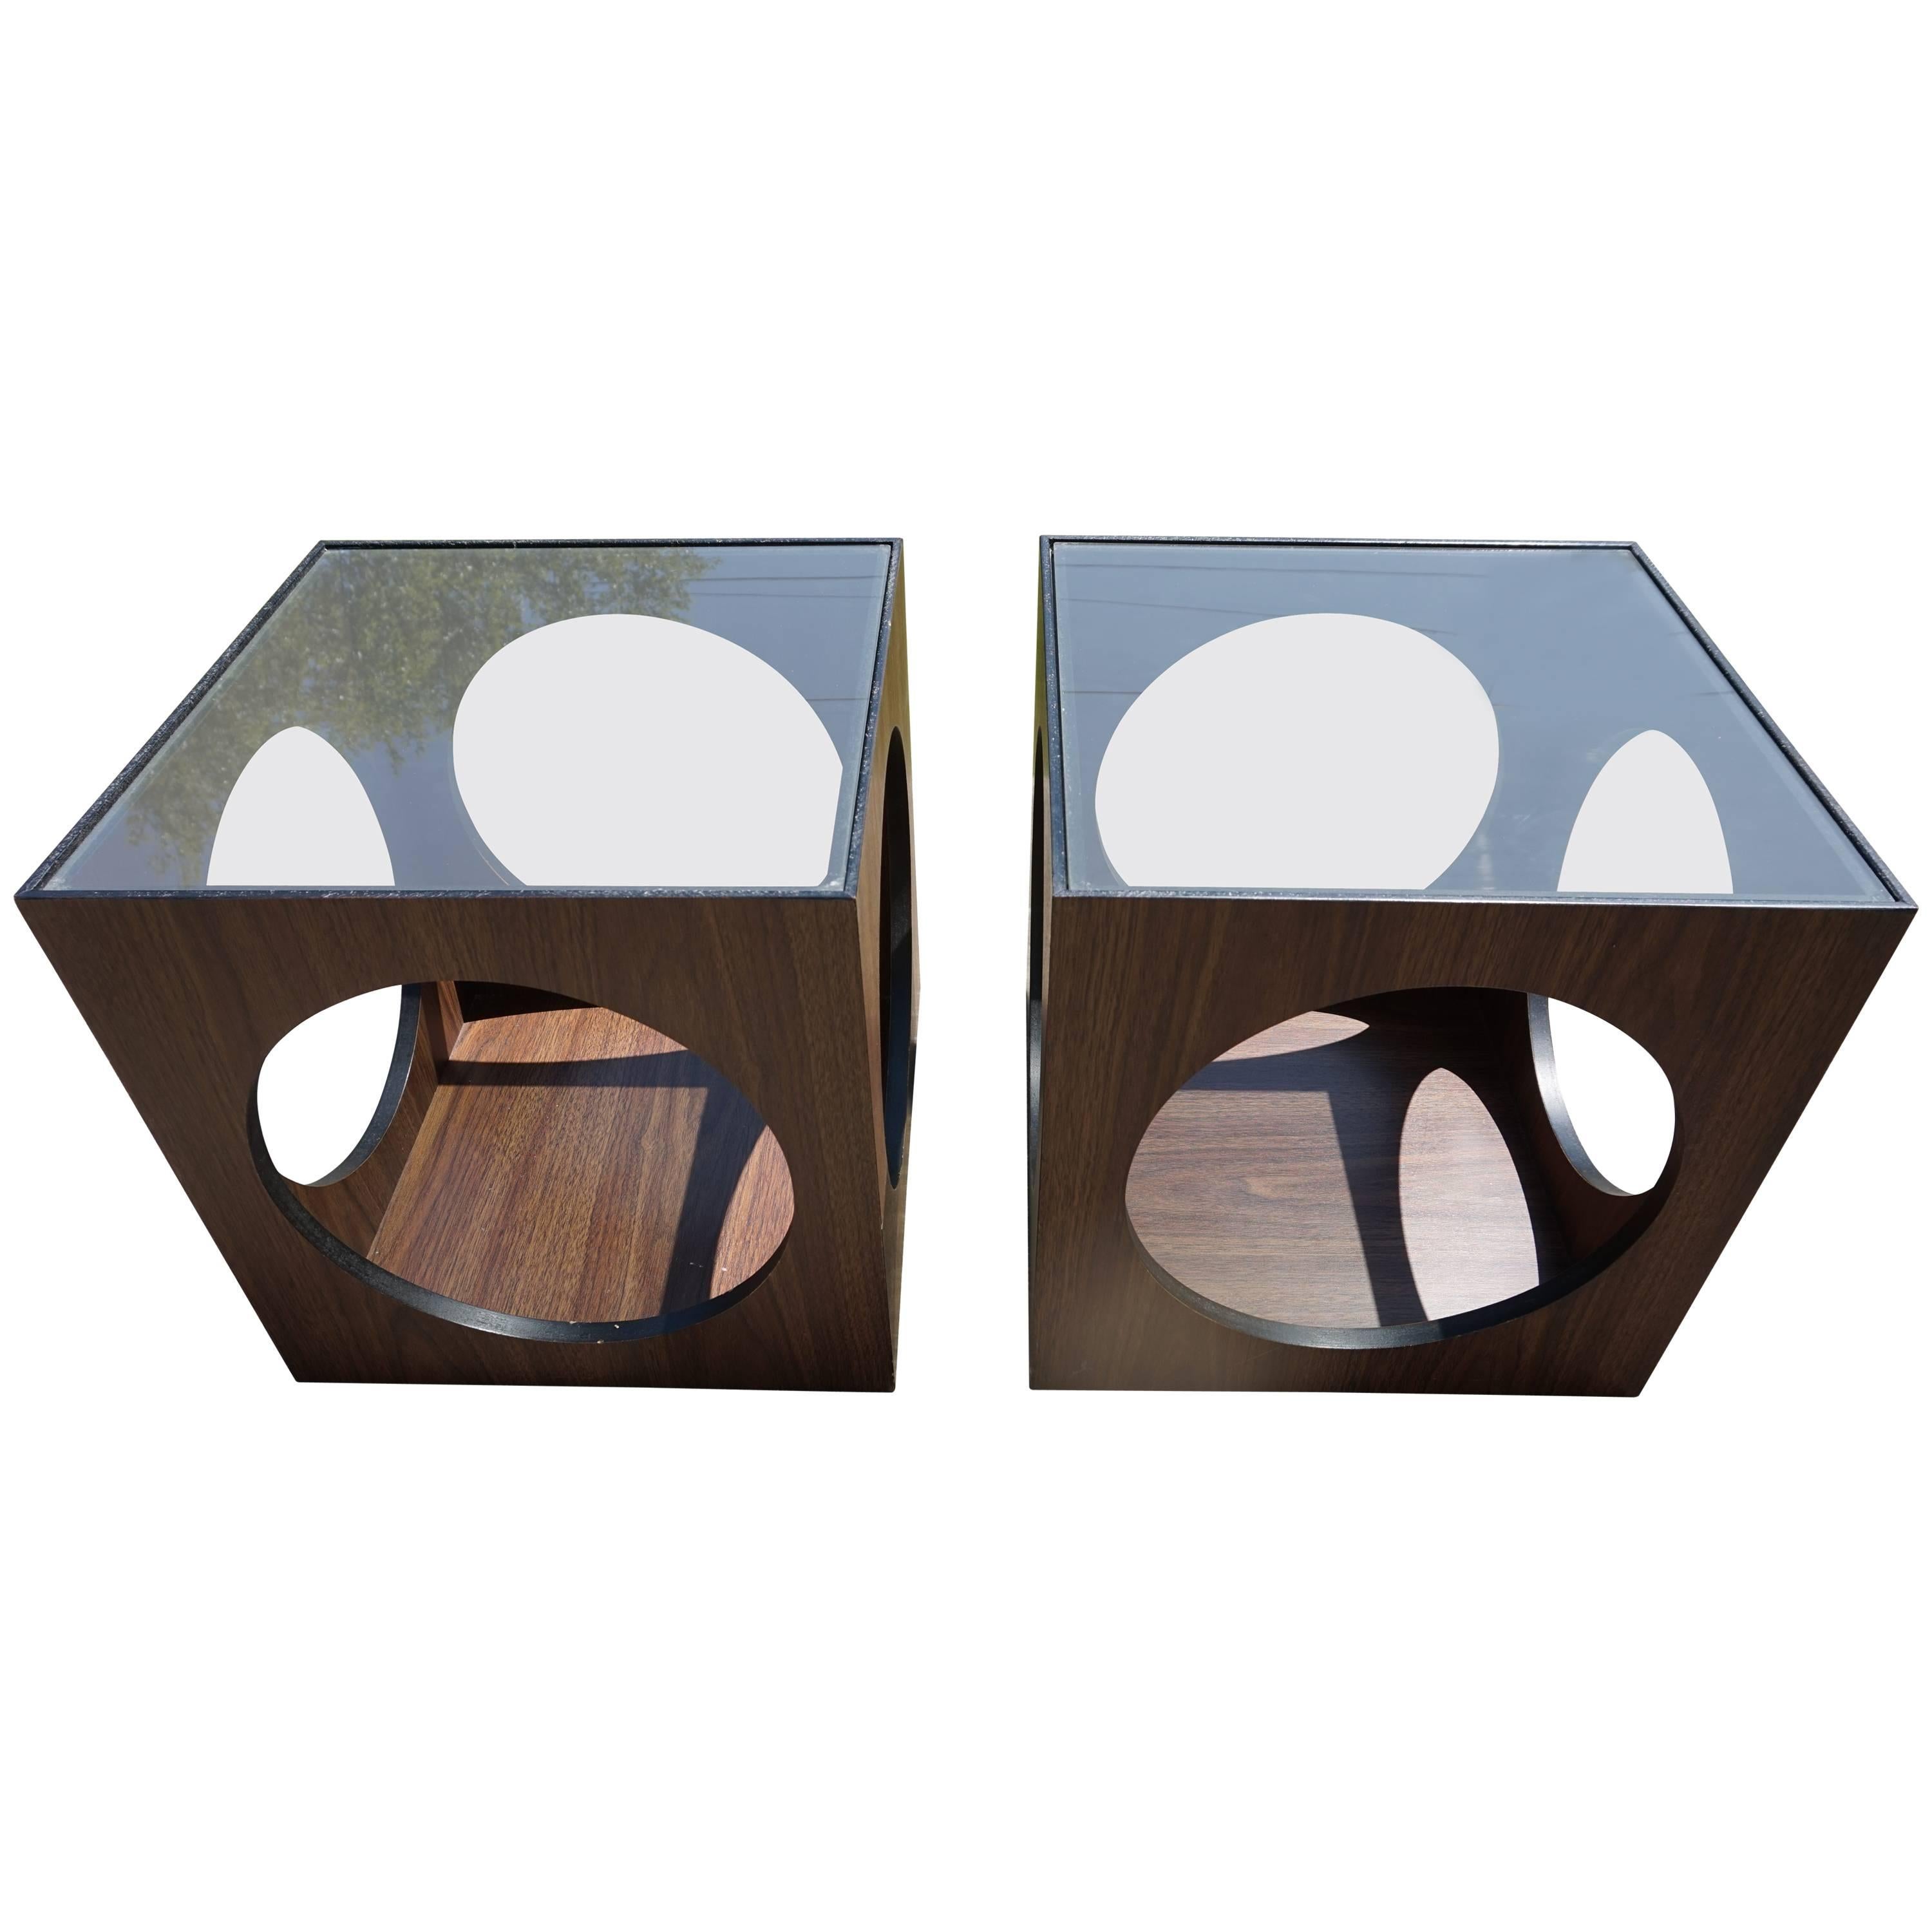 Cool Pair of Lane Walnut Cube Side Tables Circle Cut-Outs, Mid-Century Modern